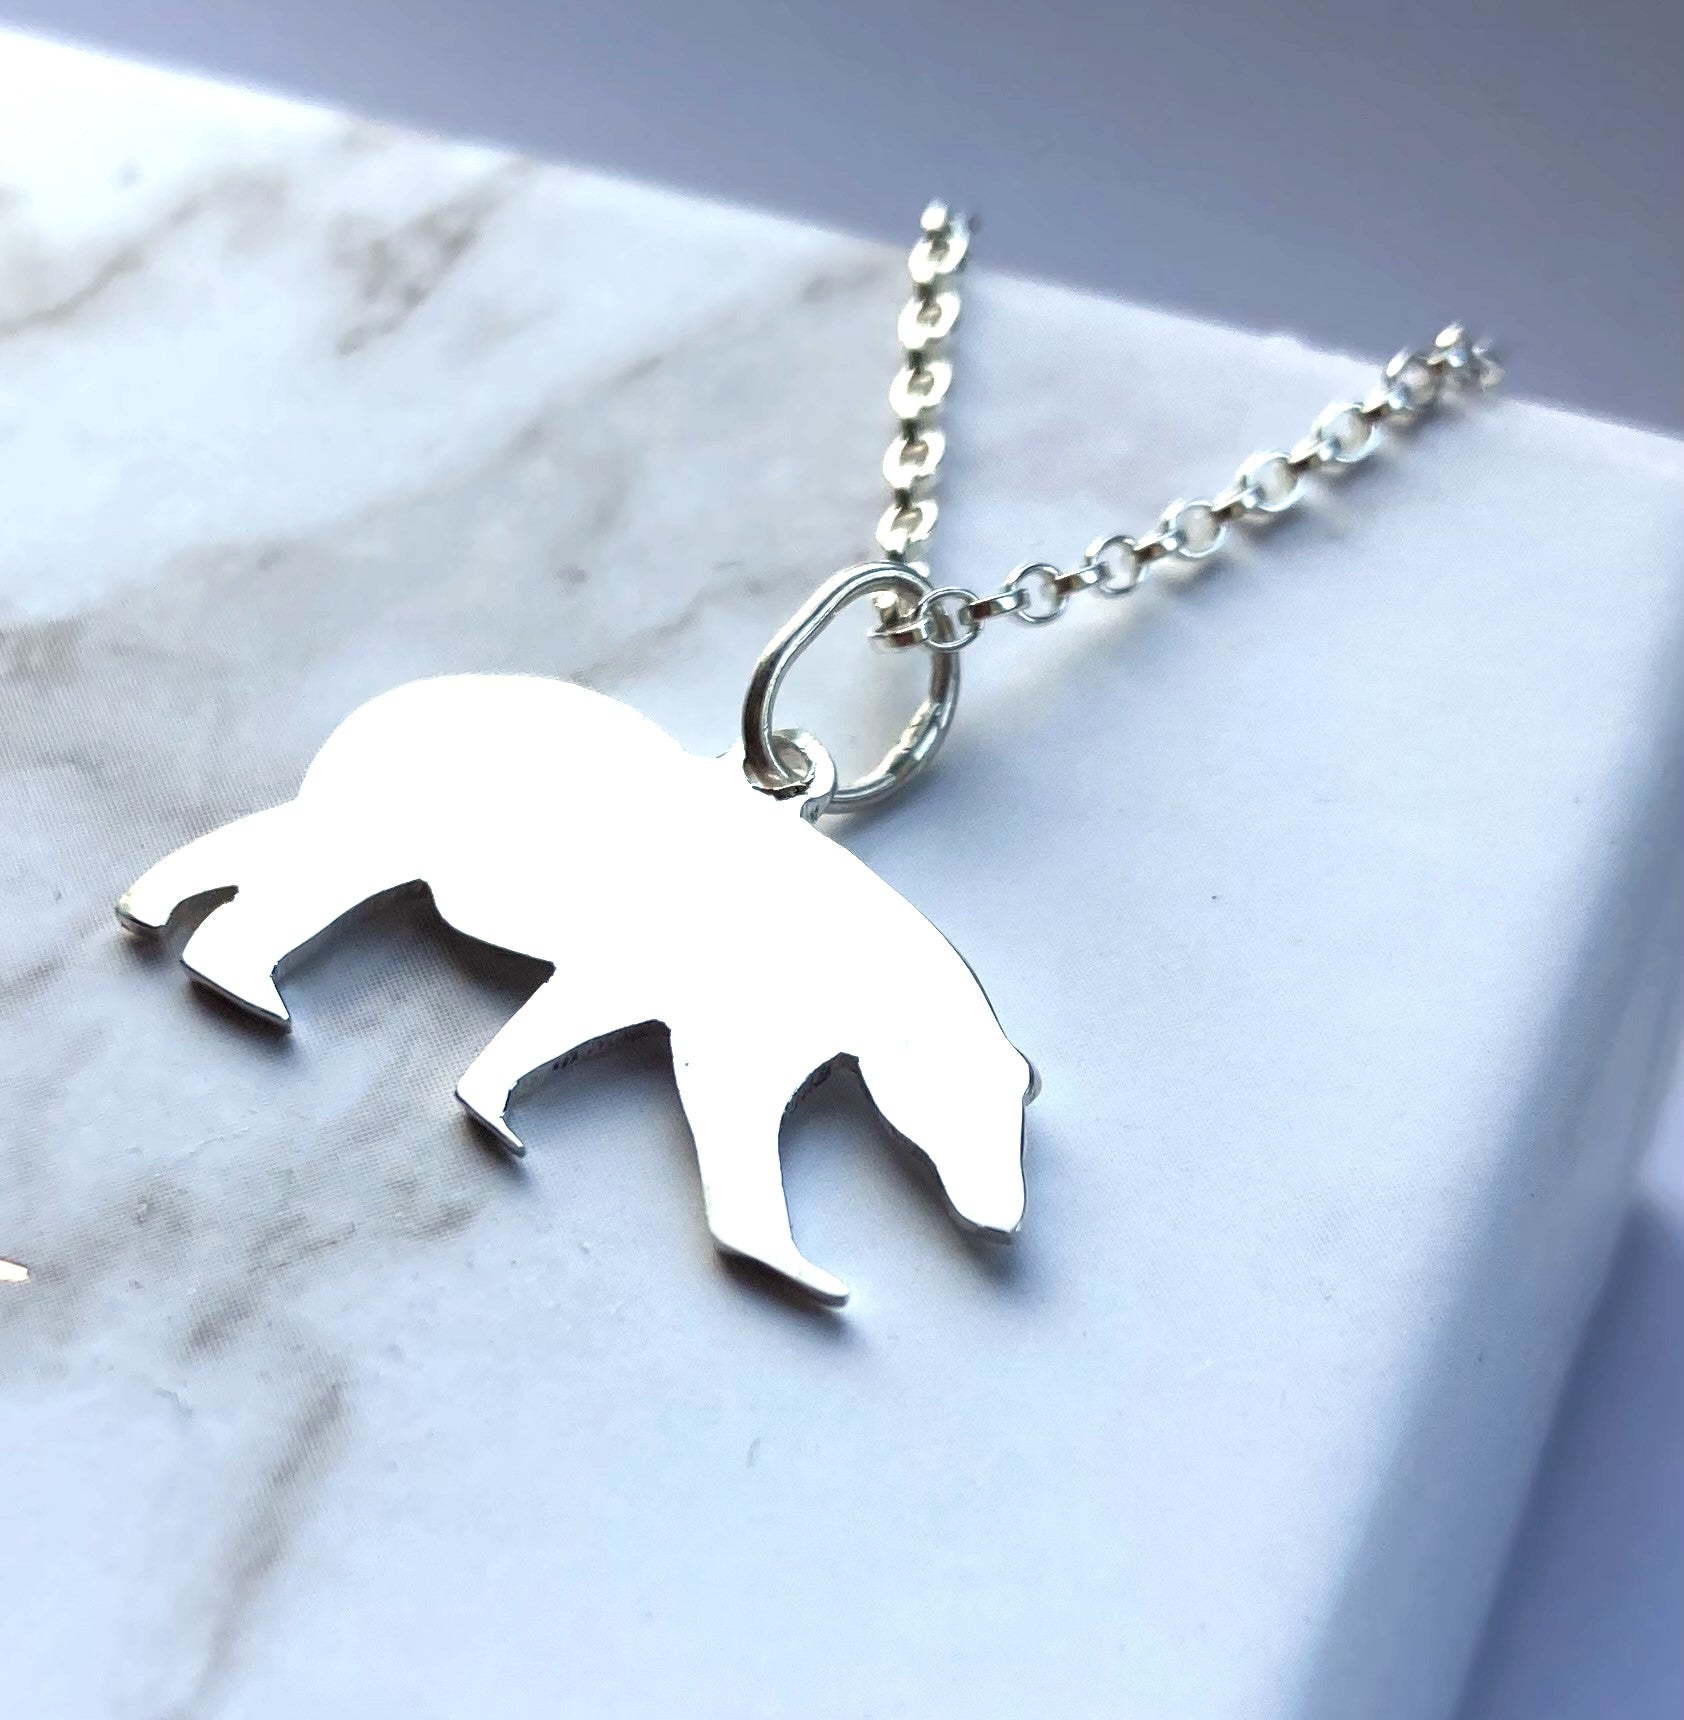 Polar bear silver pendant and chain on marbled background